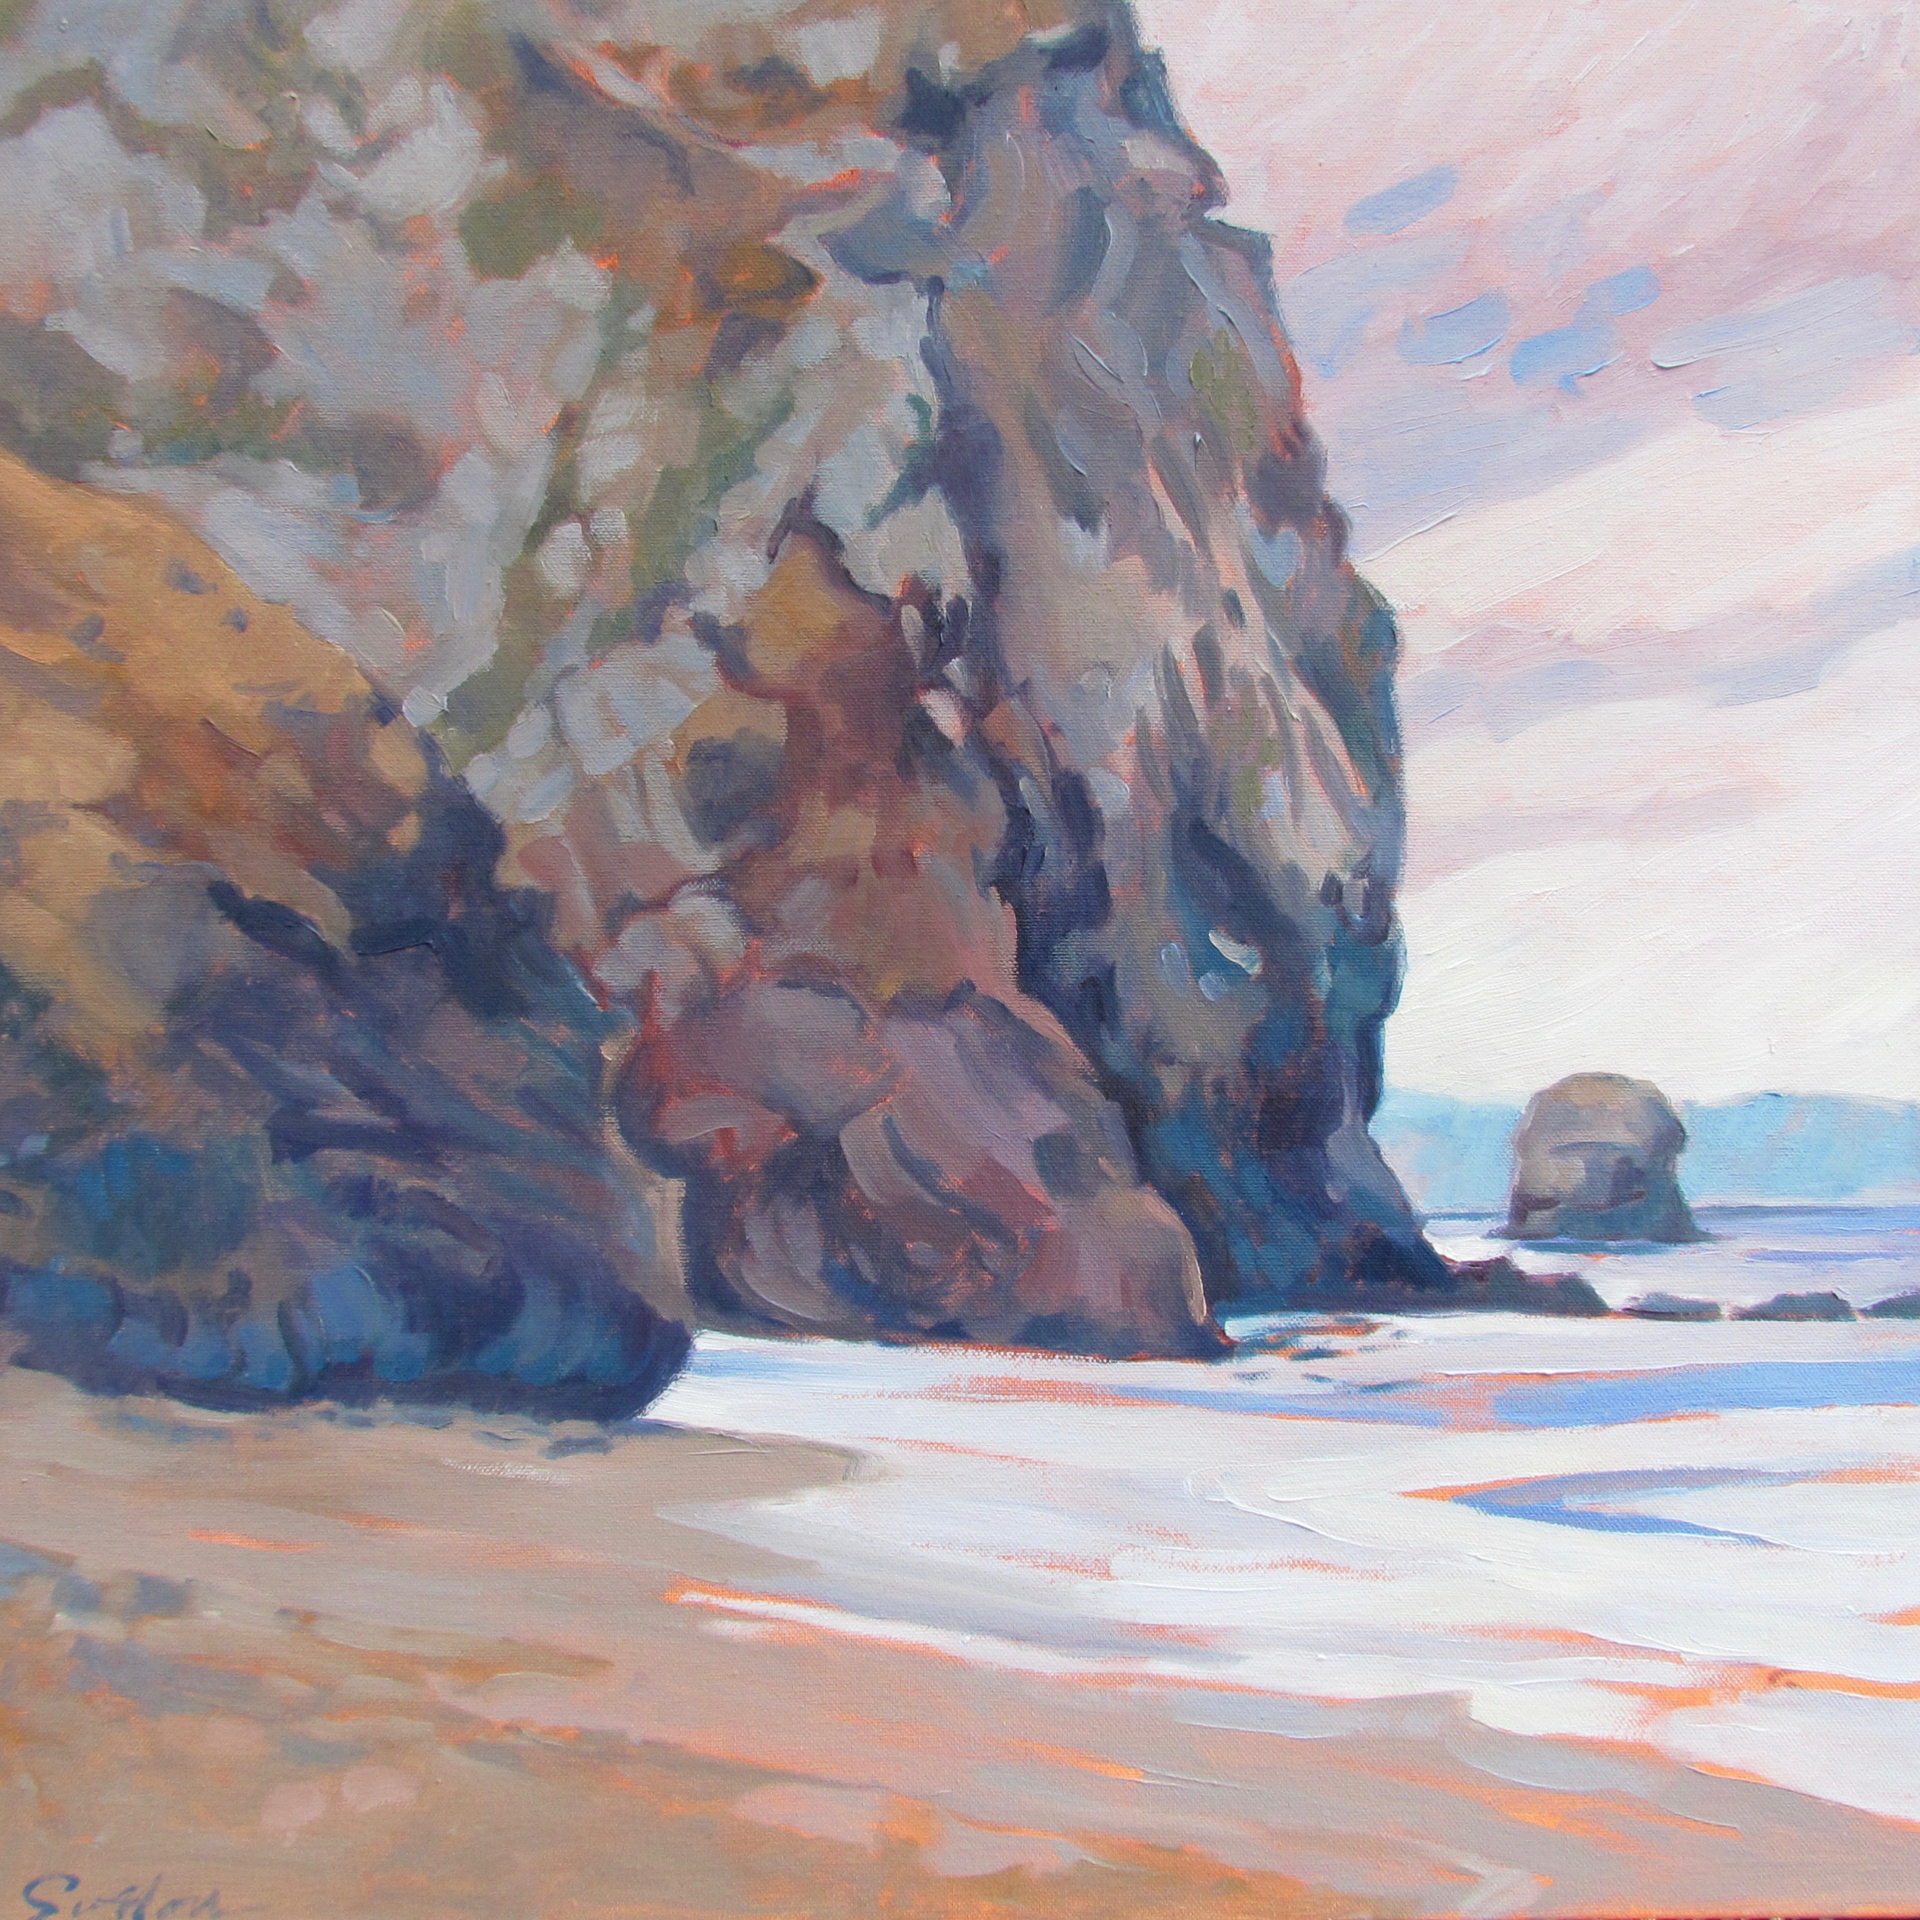 Cove at Tennessee Valley 2 by Carla Sutton